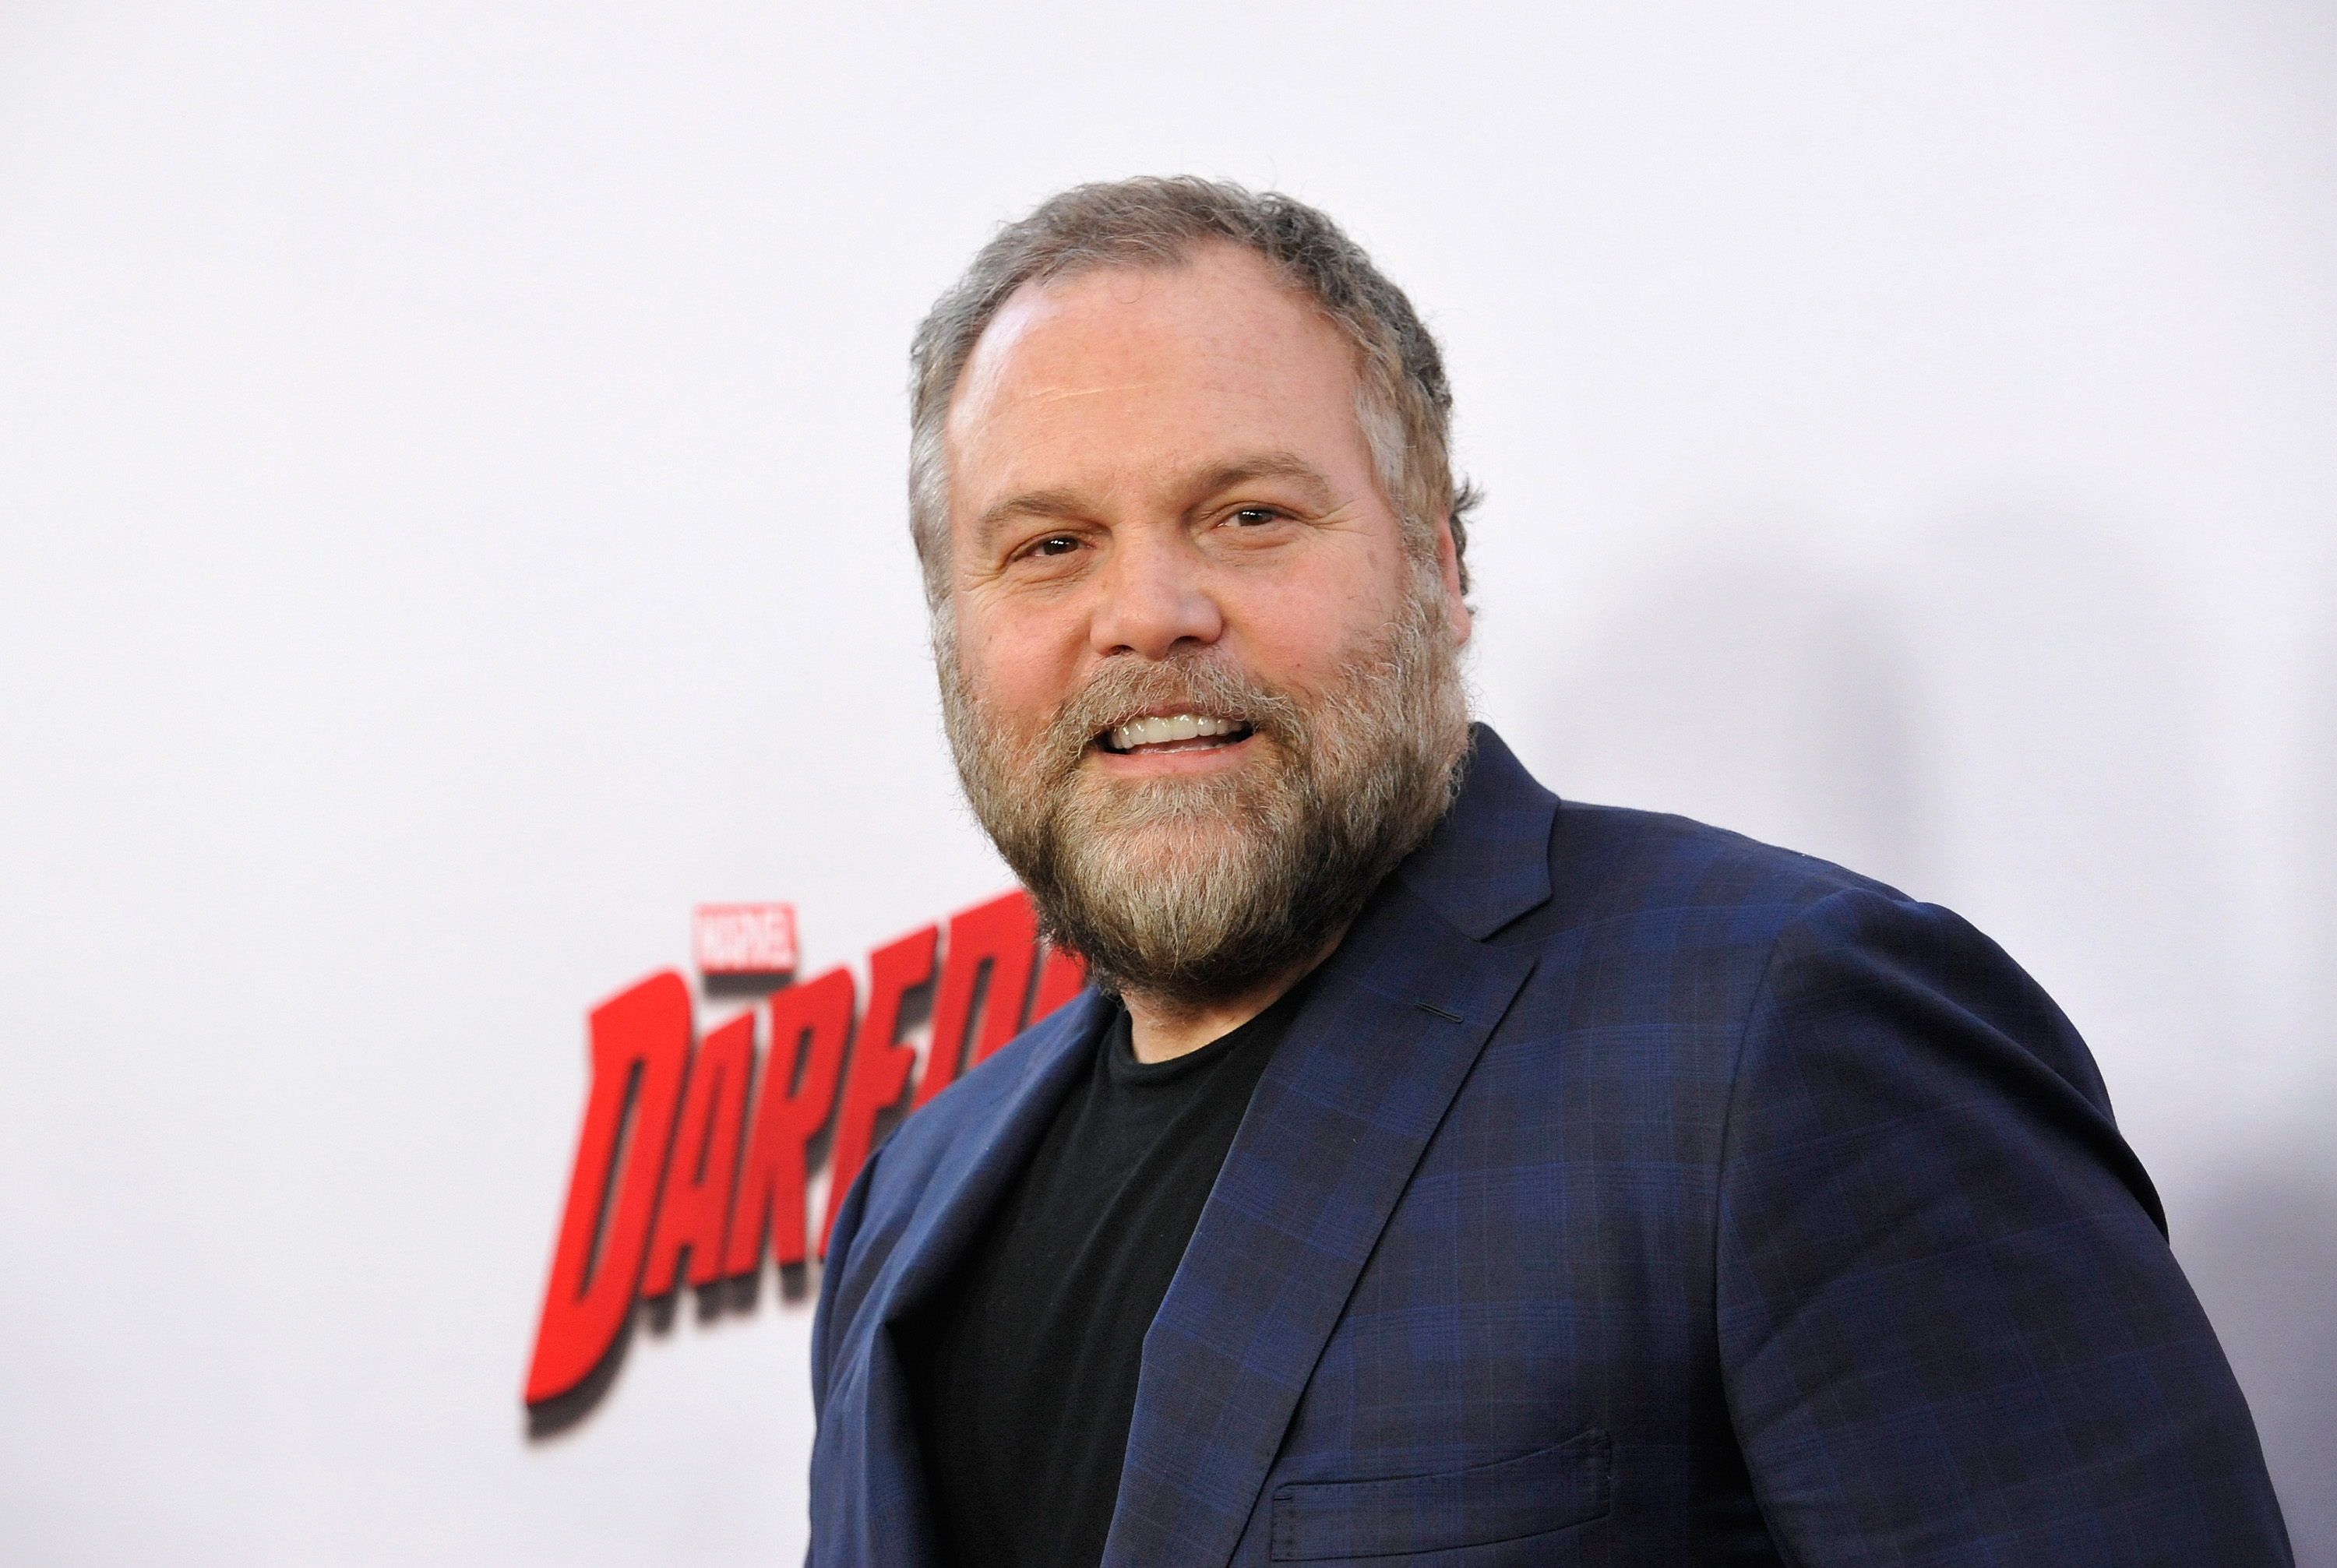 'Hawkeye' actor Vincent D'Onofrio, who plays Kingpin, wears a blue suit jacket over a black shirt.